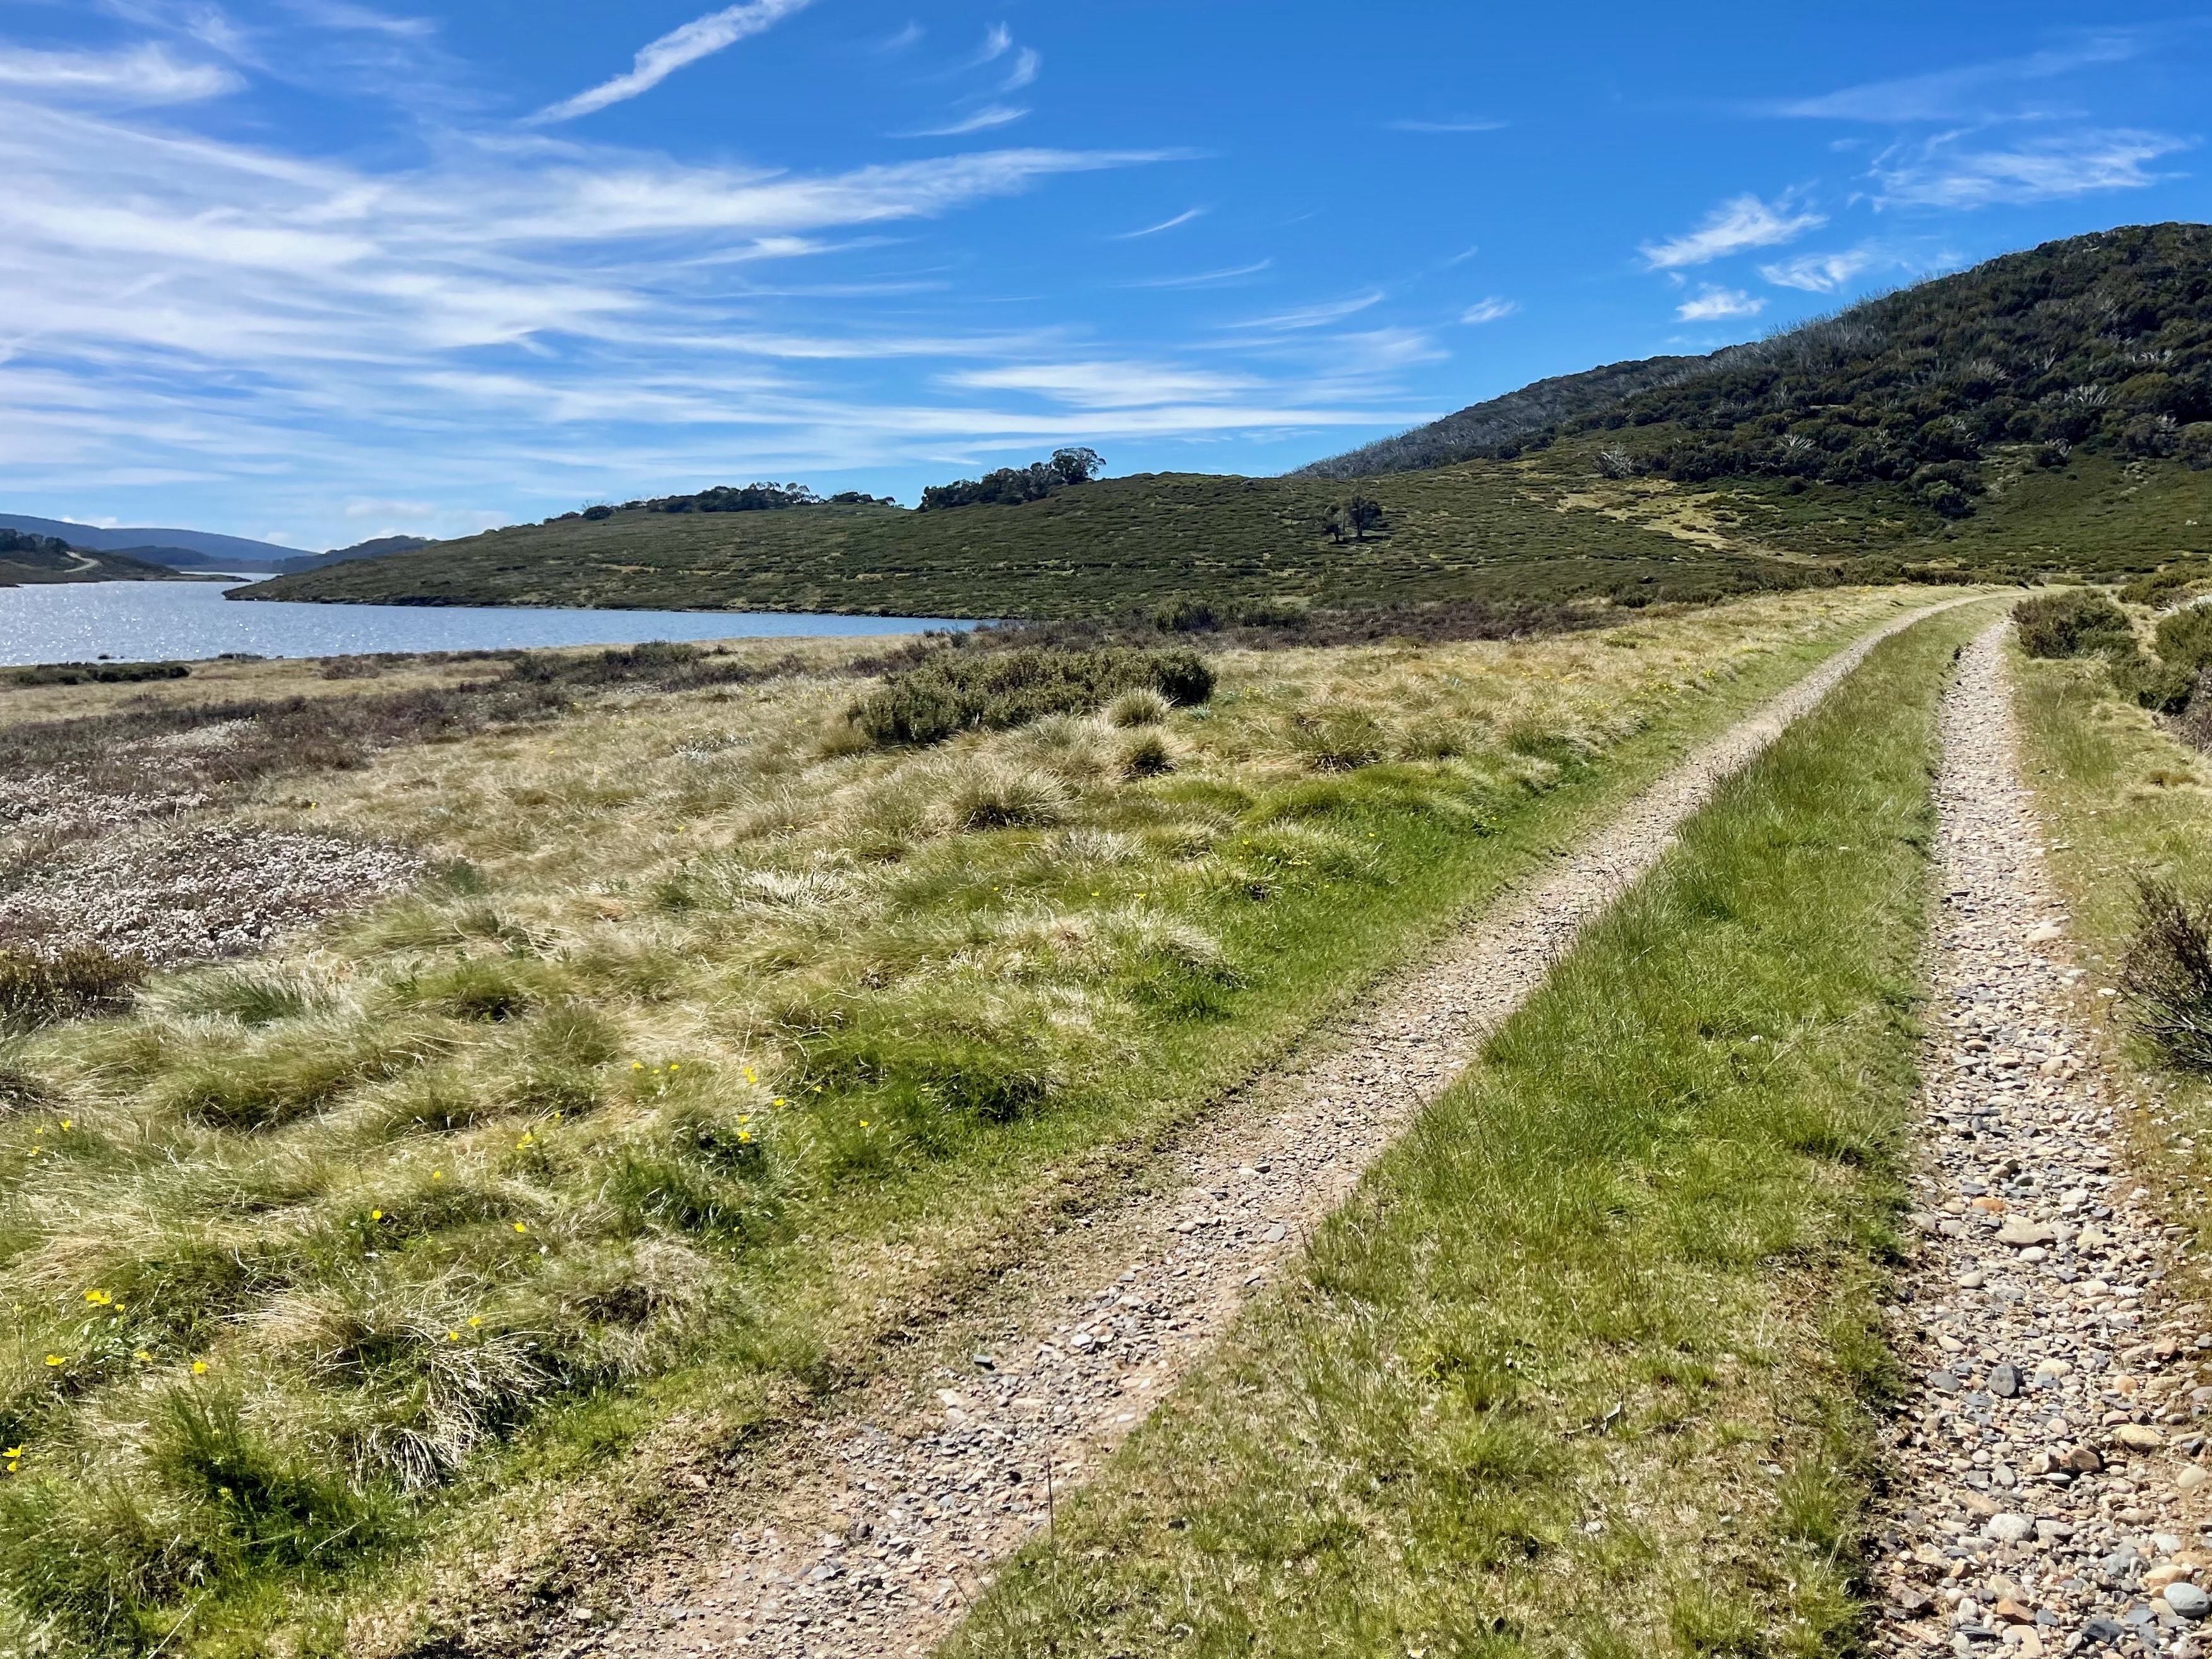 Double track gravel road winding through rolling hills surrounded by lush green tussock grass and a lake with surrounding hills in the background